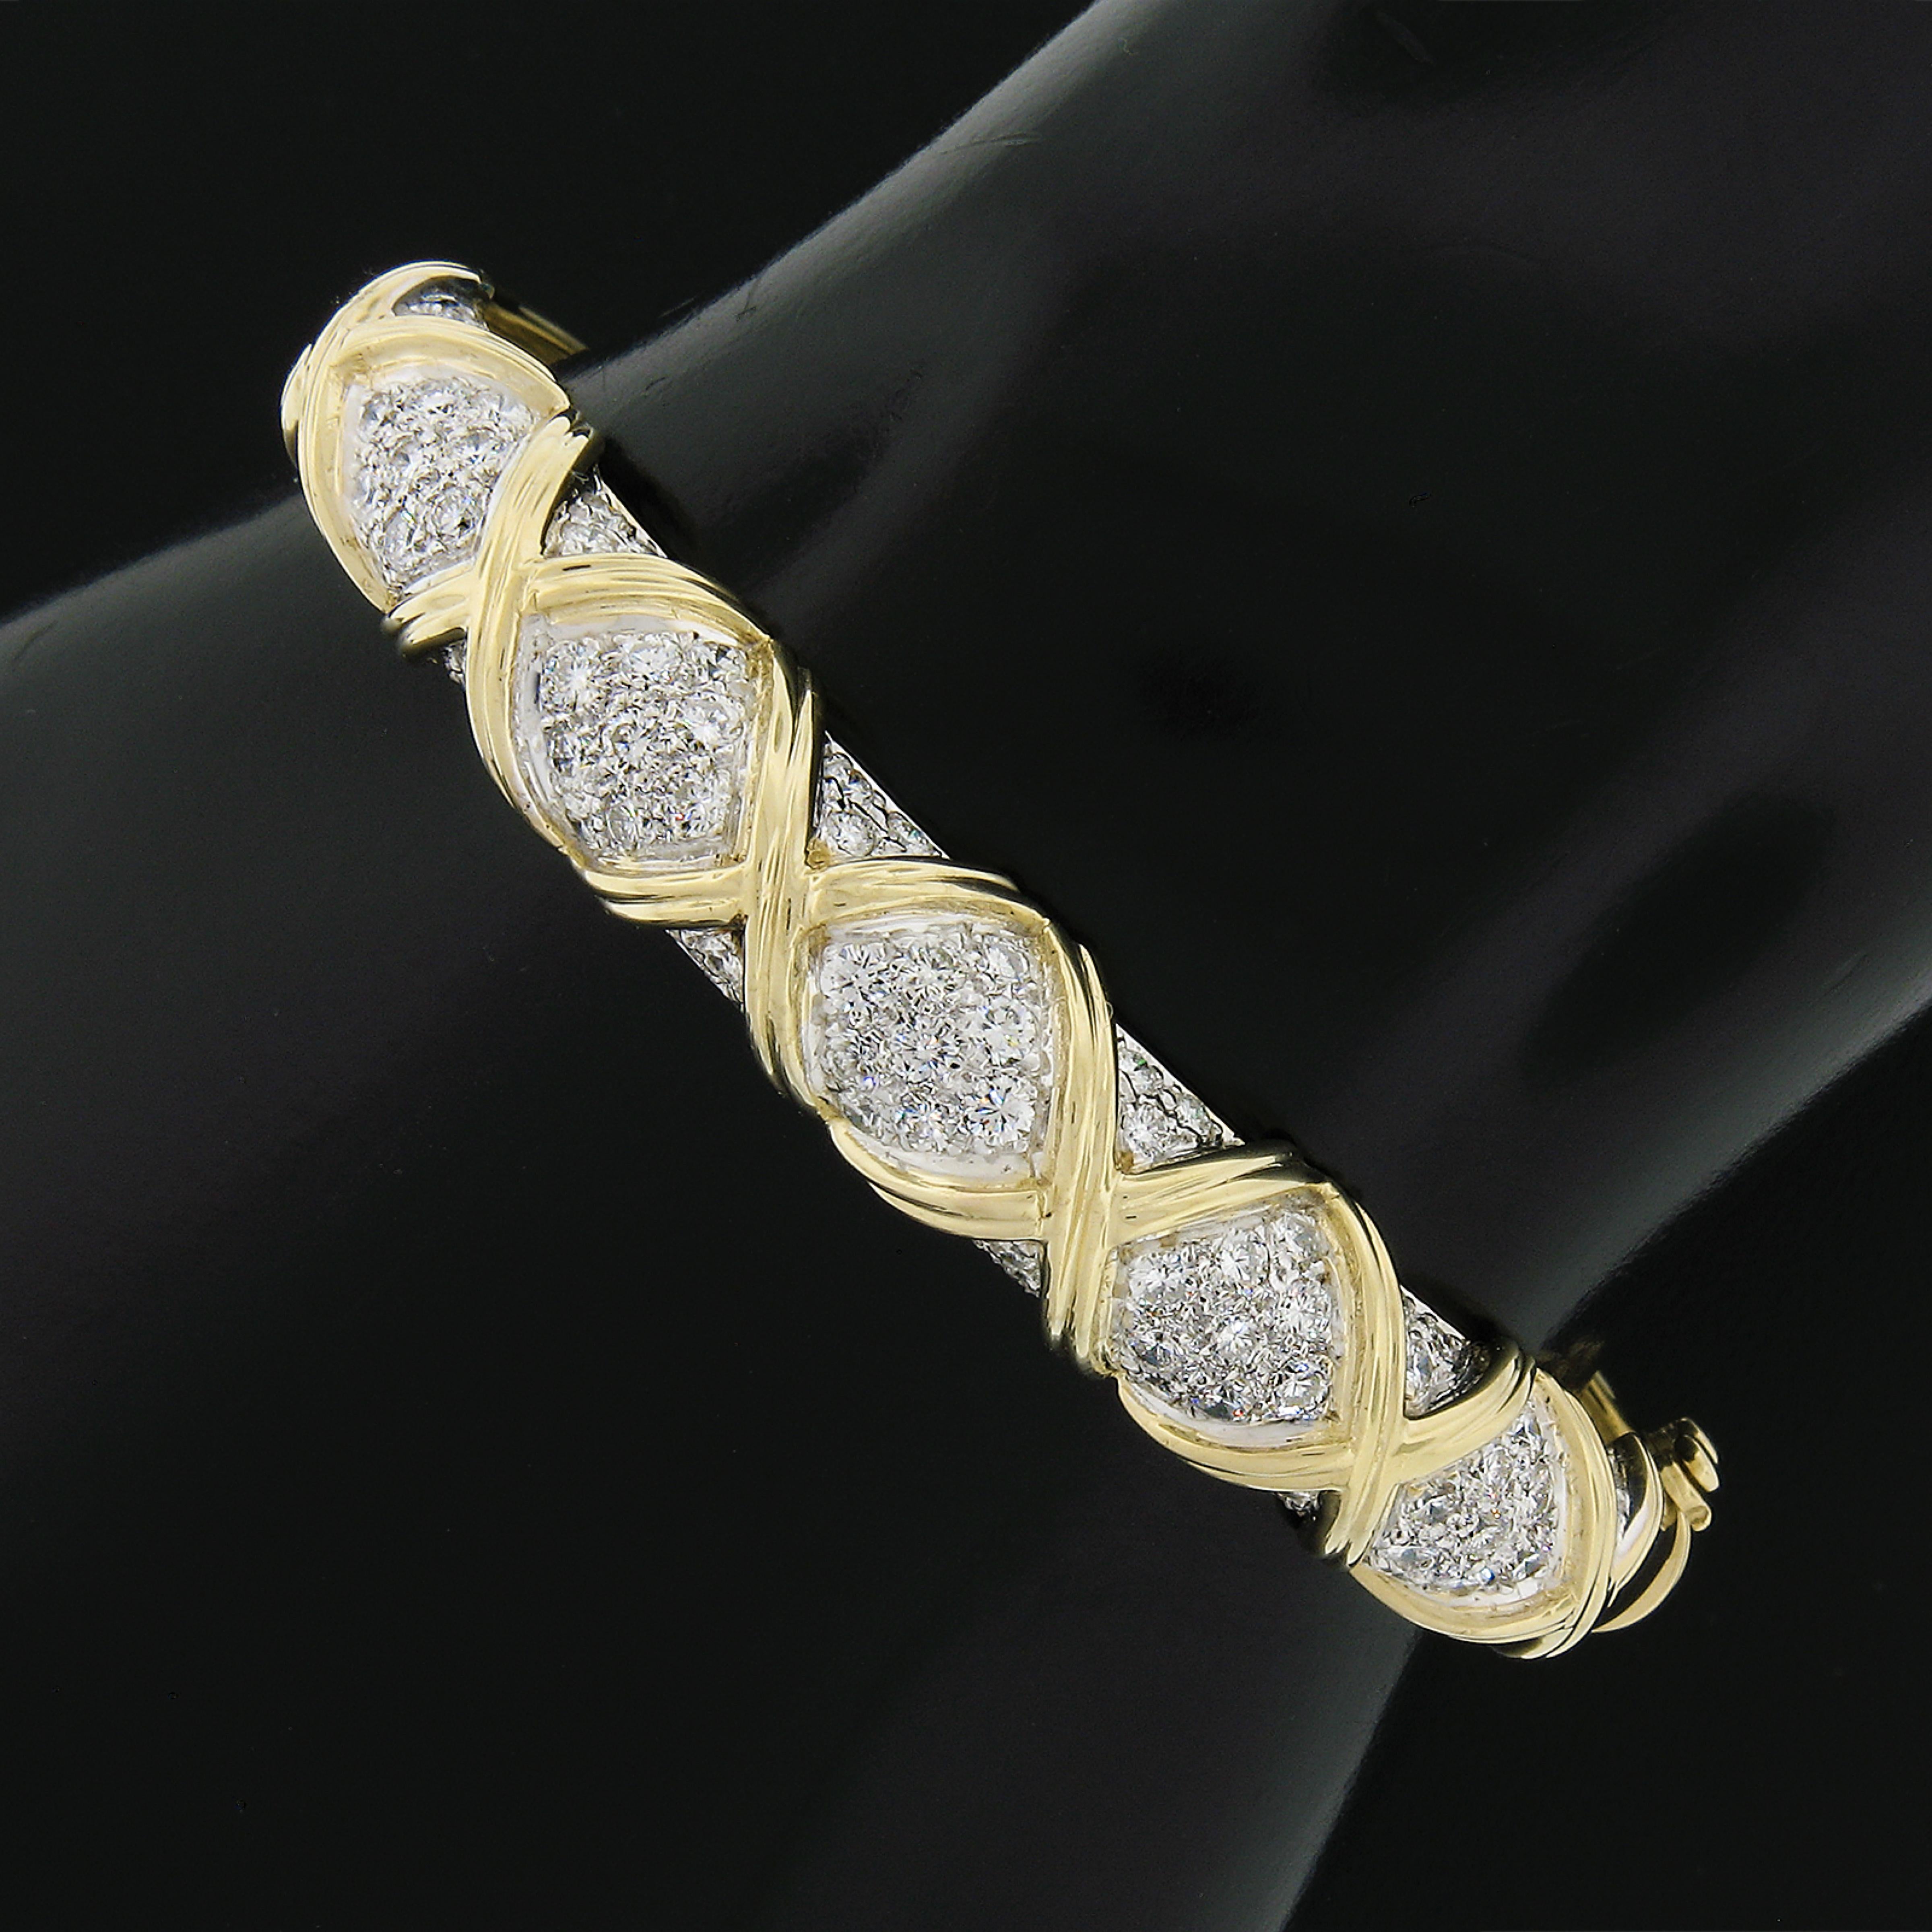 This gorgeous and very well made diamond bangle bracelet is crafted in solid 14k yellow and features a lovely figure X design set in sections with approximately 2.65 carats of very fine quality diamonds. The diamonds display amazing amount of fire